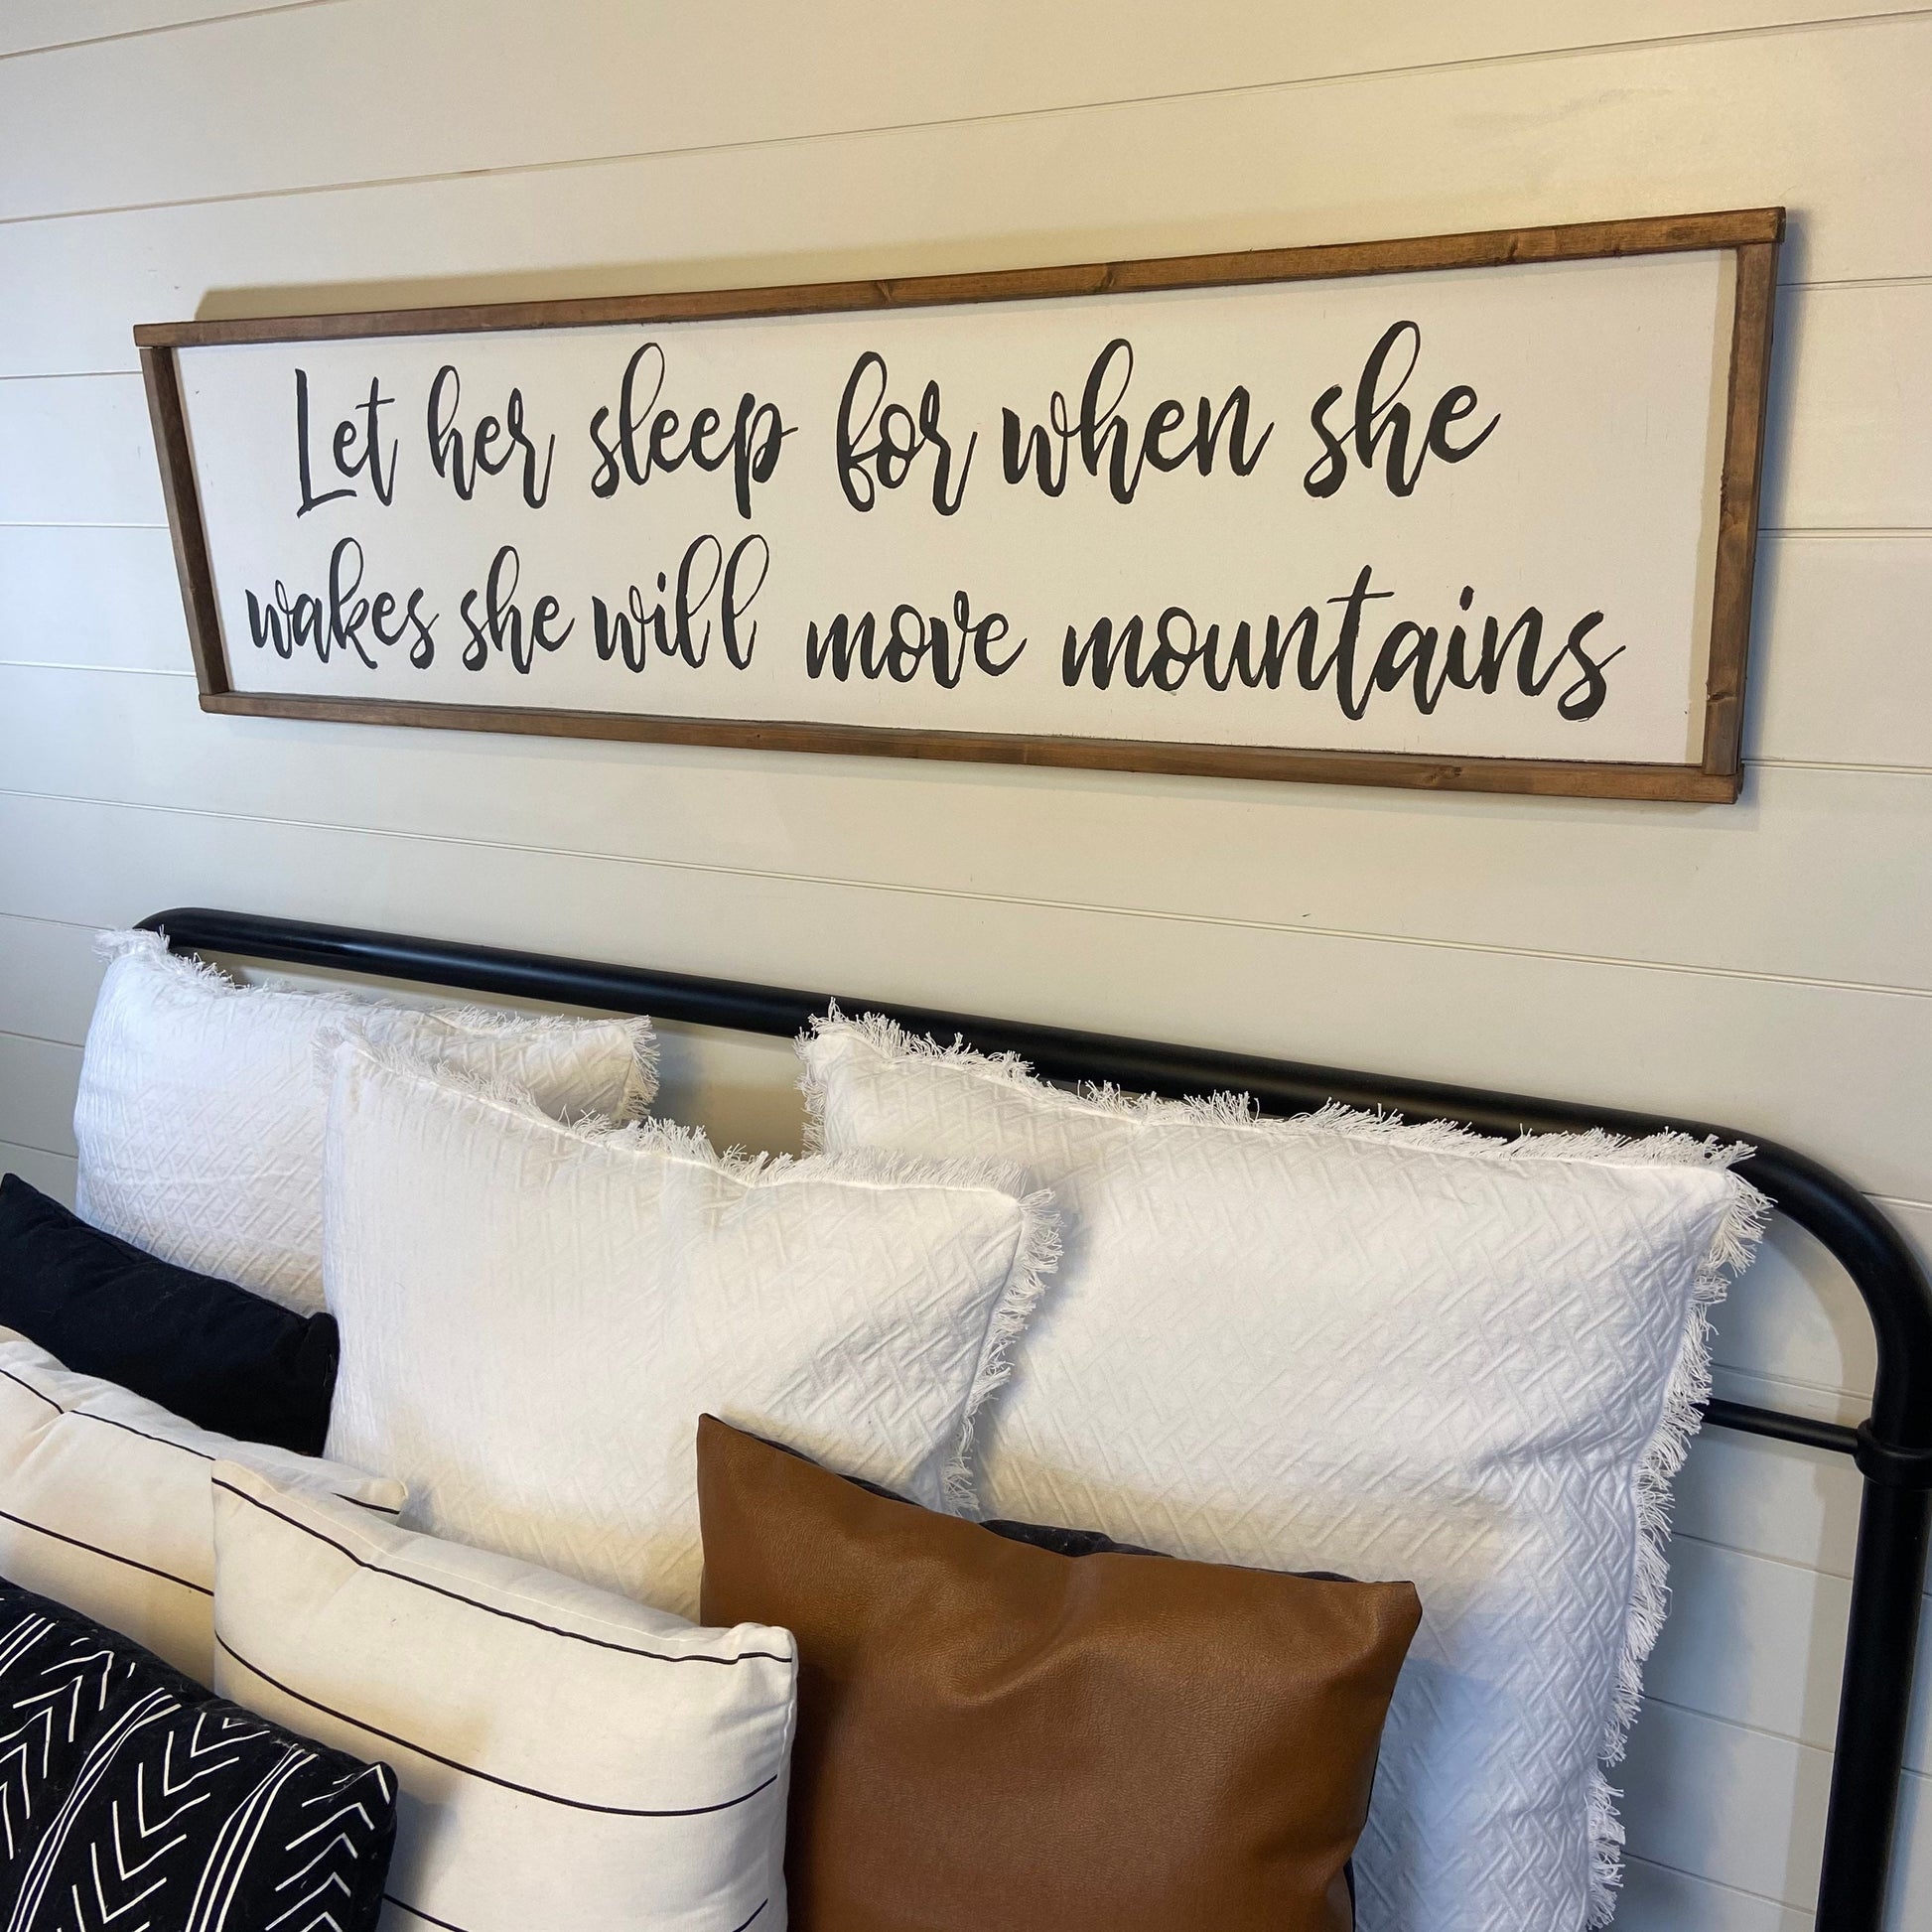 let her sleep - move mountains - above over the bed [FREE SHIPPING!]